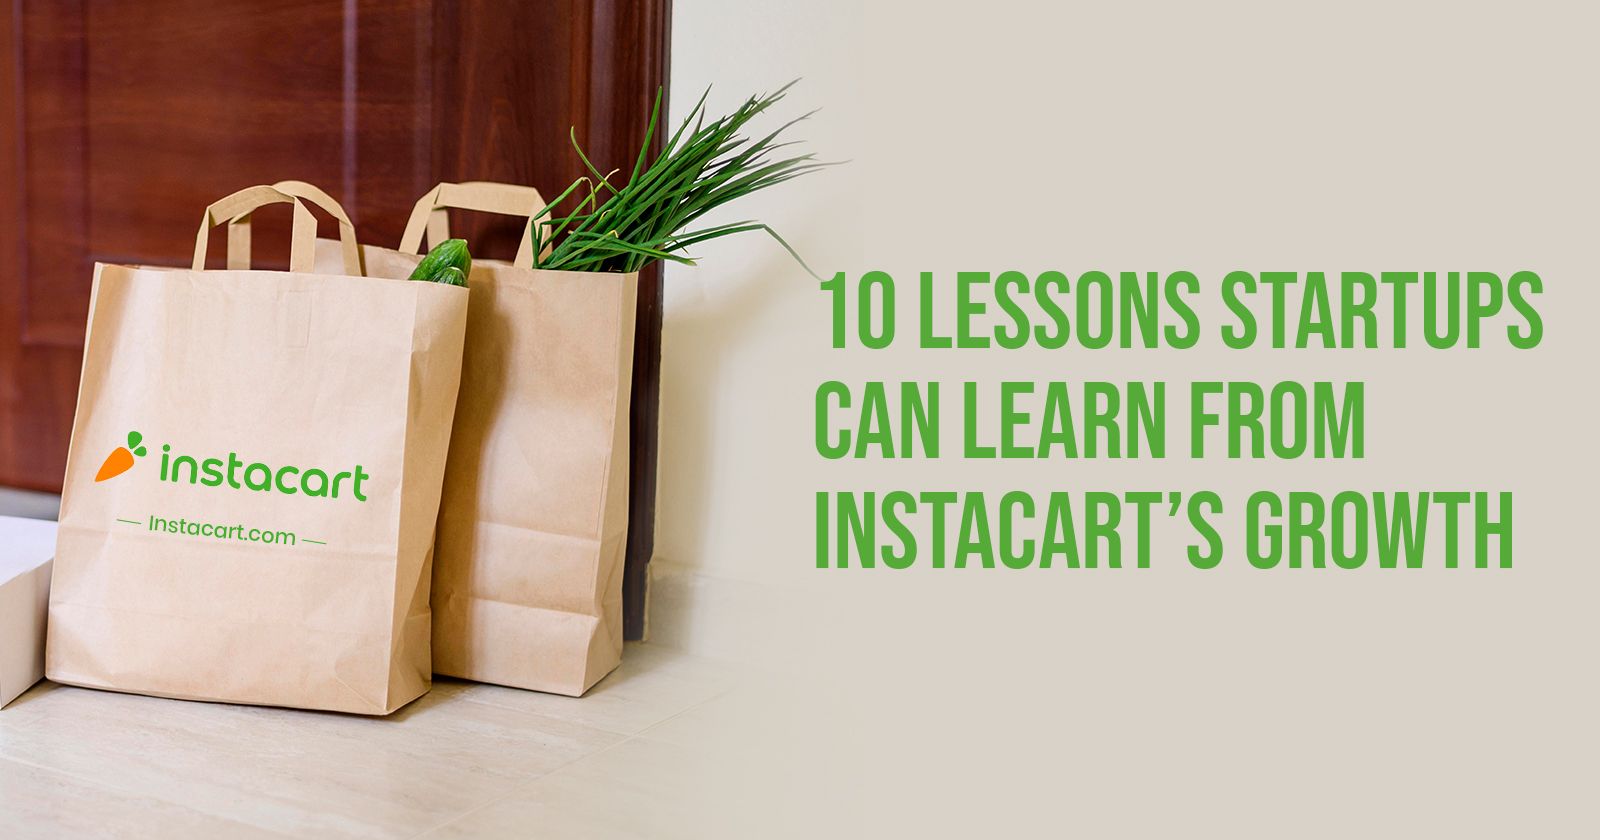 featured image - 10 Lessons Startups Can Learn from Instacart’s Growth